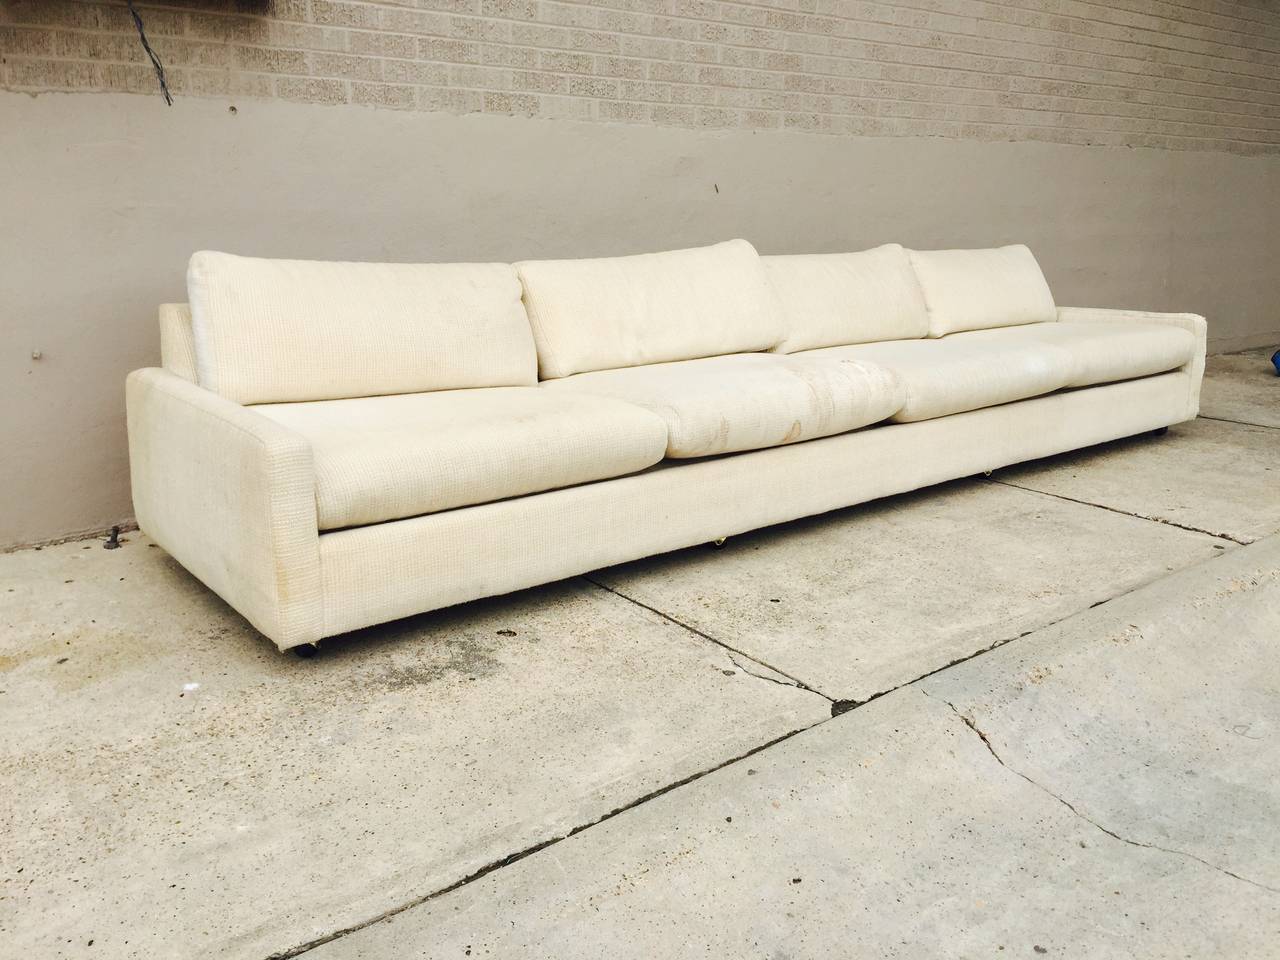 12 feet cream color sofa with casters in the style of Milo Baughman. Study frame. Does need to be upholstered, circa 1970s.

Dimensions: 144